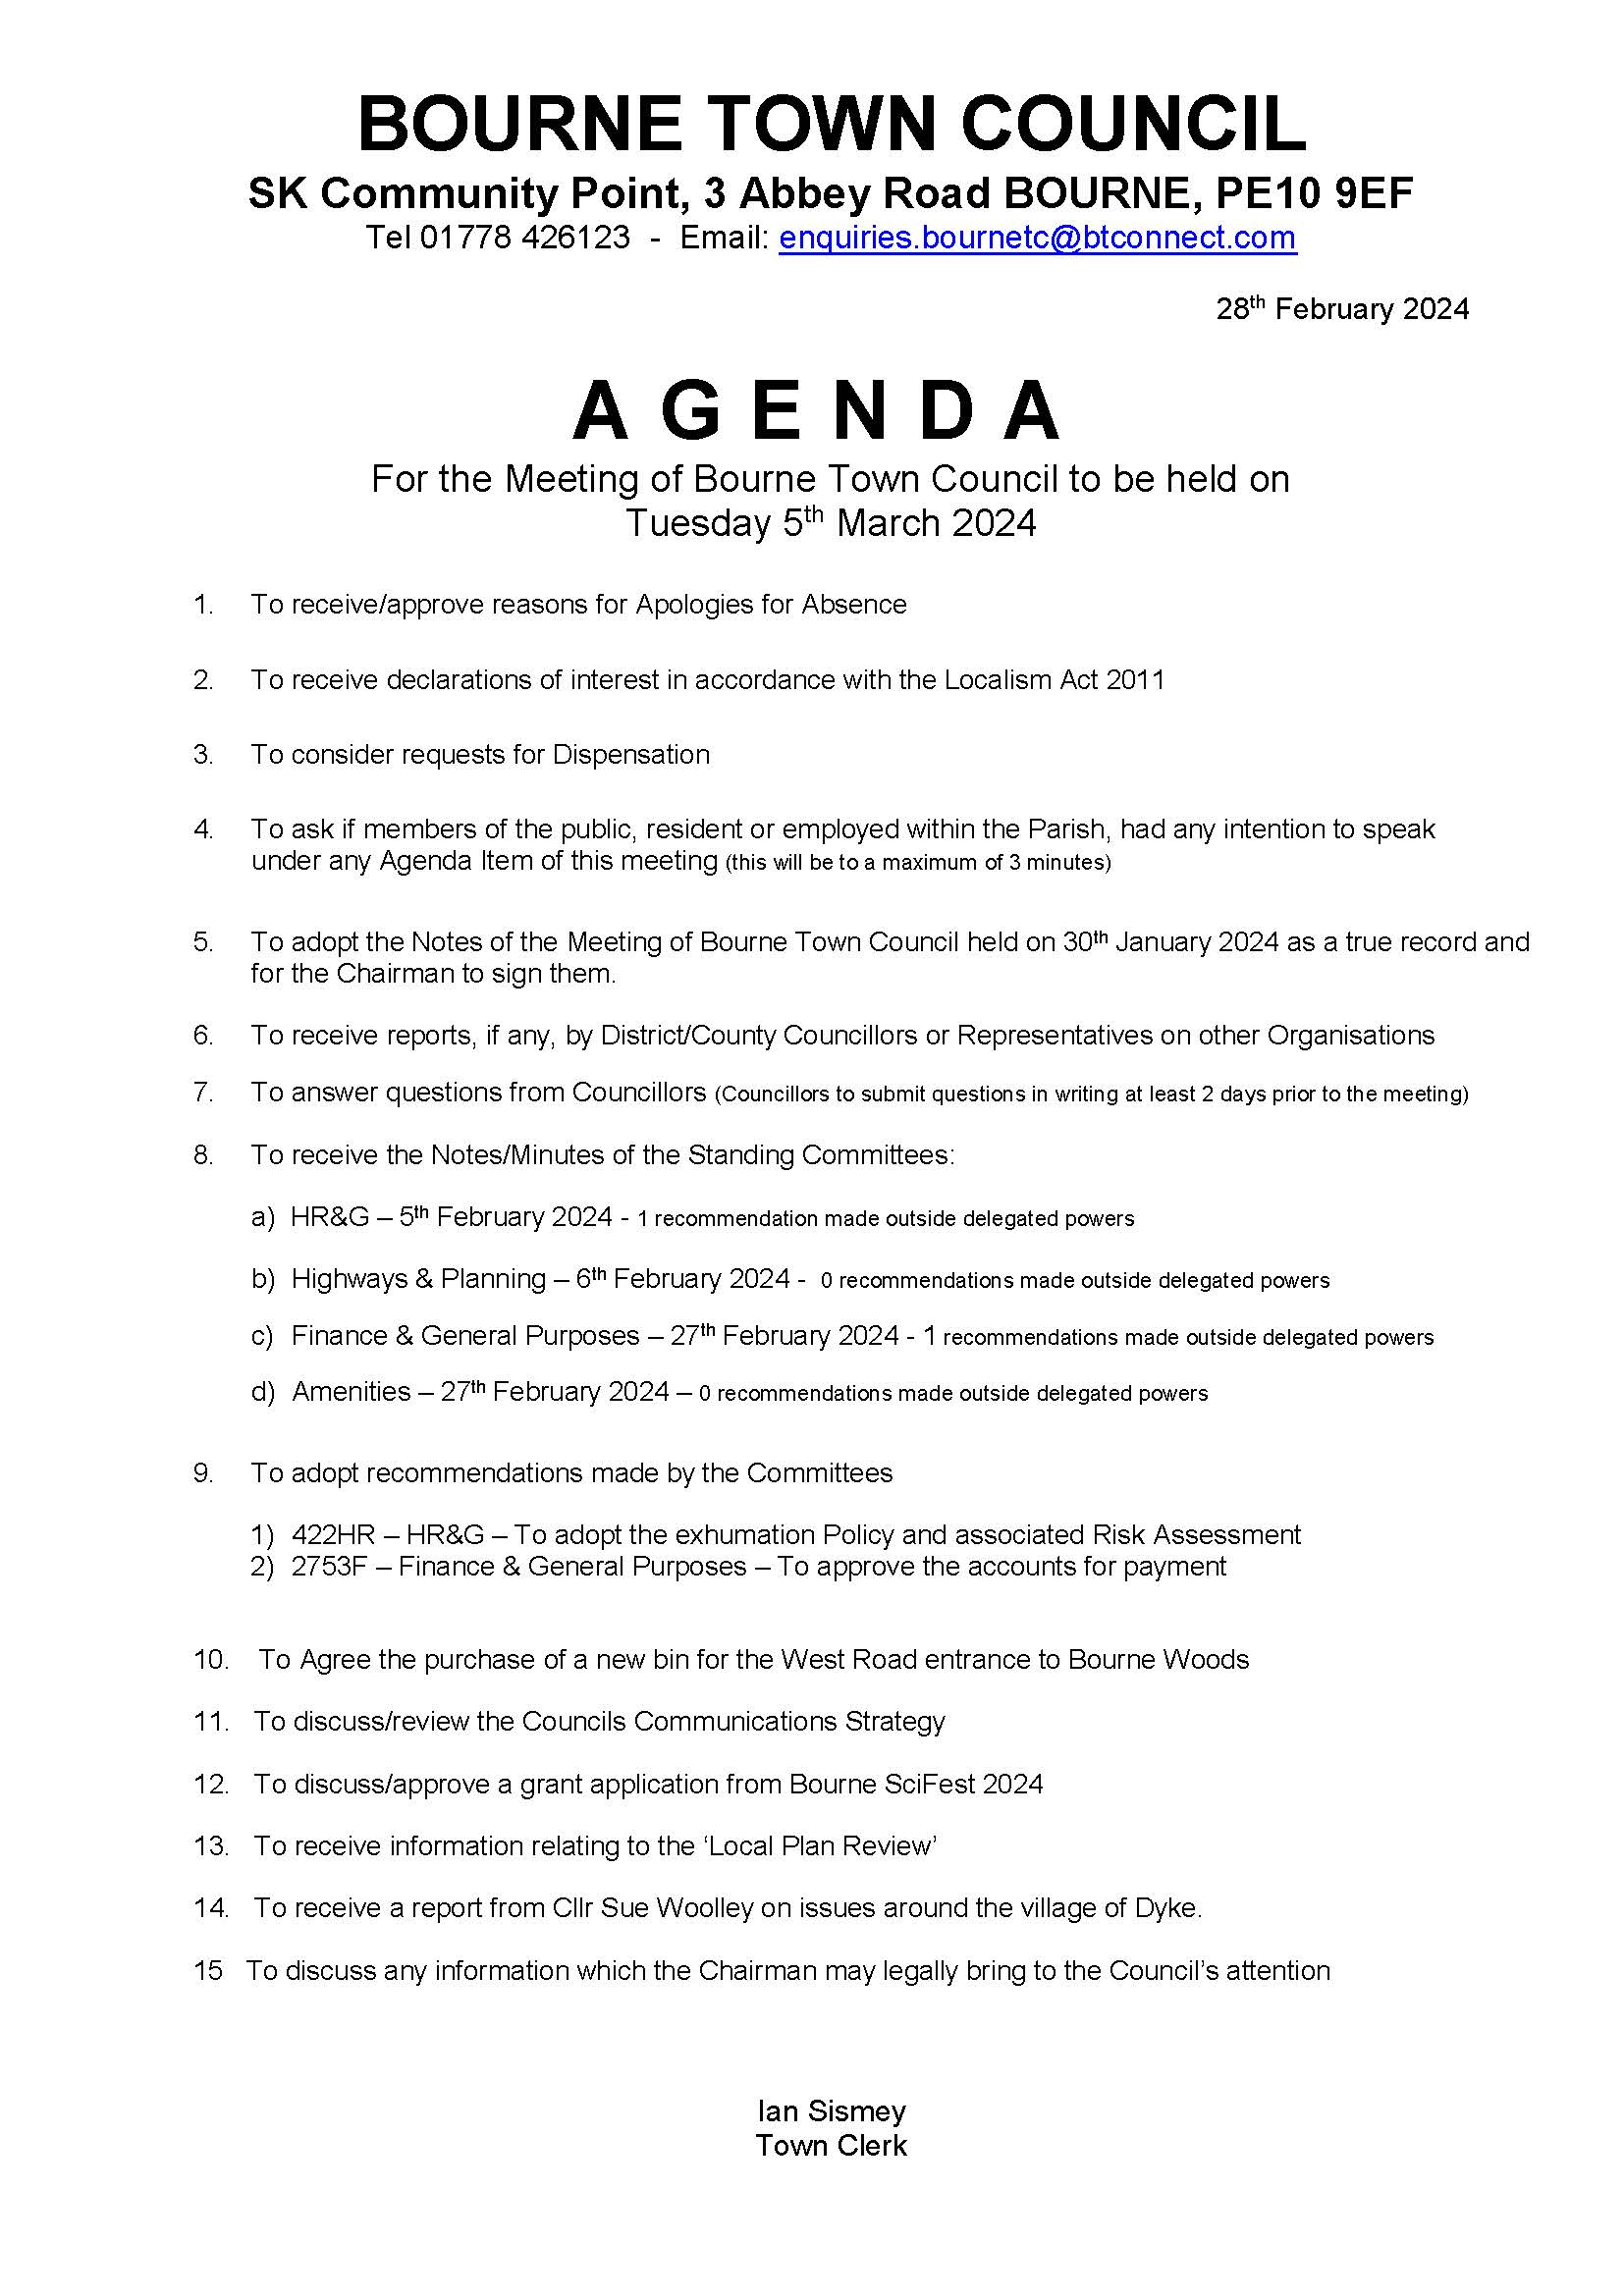 Agenda and notice page 2